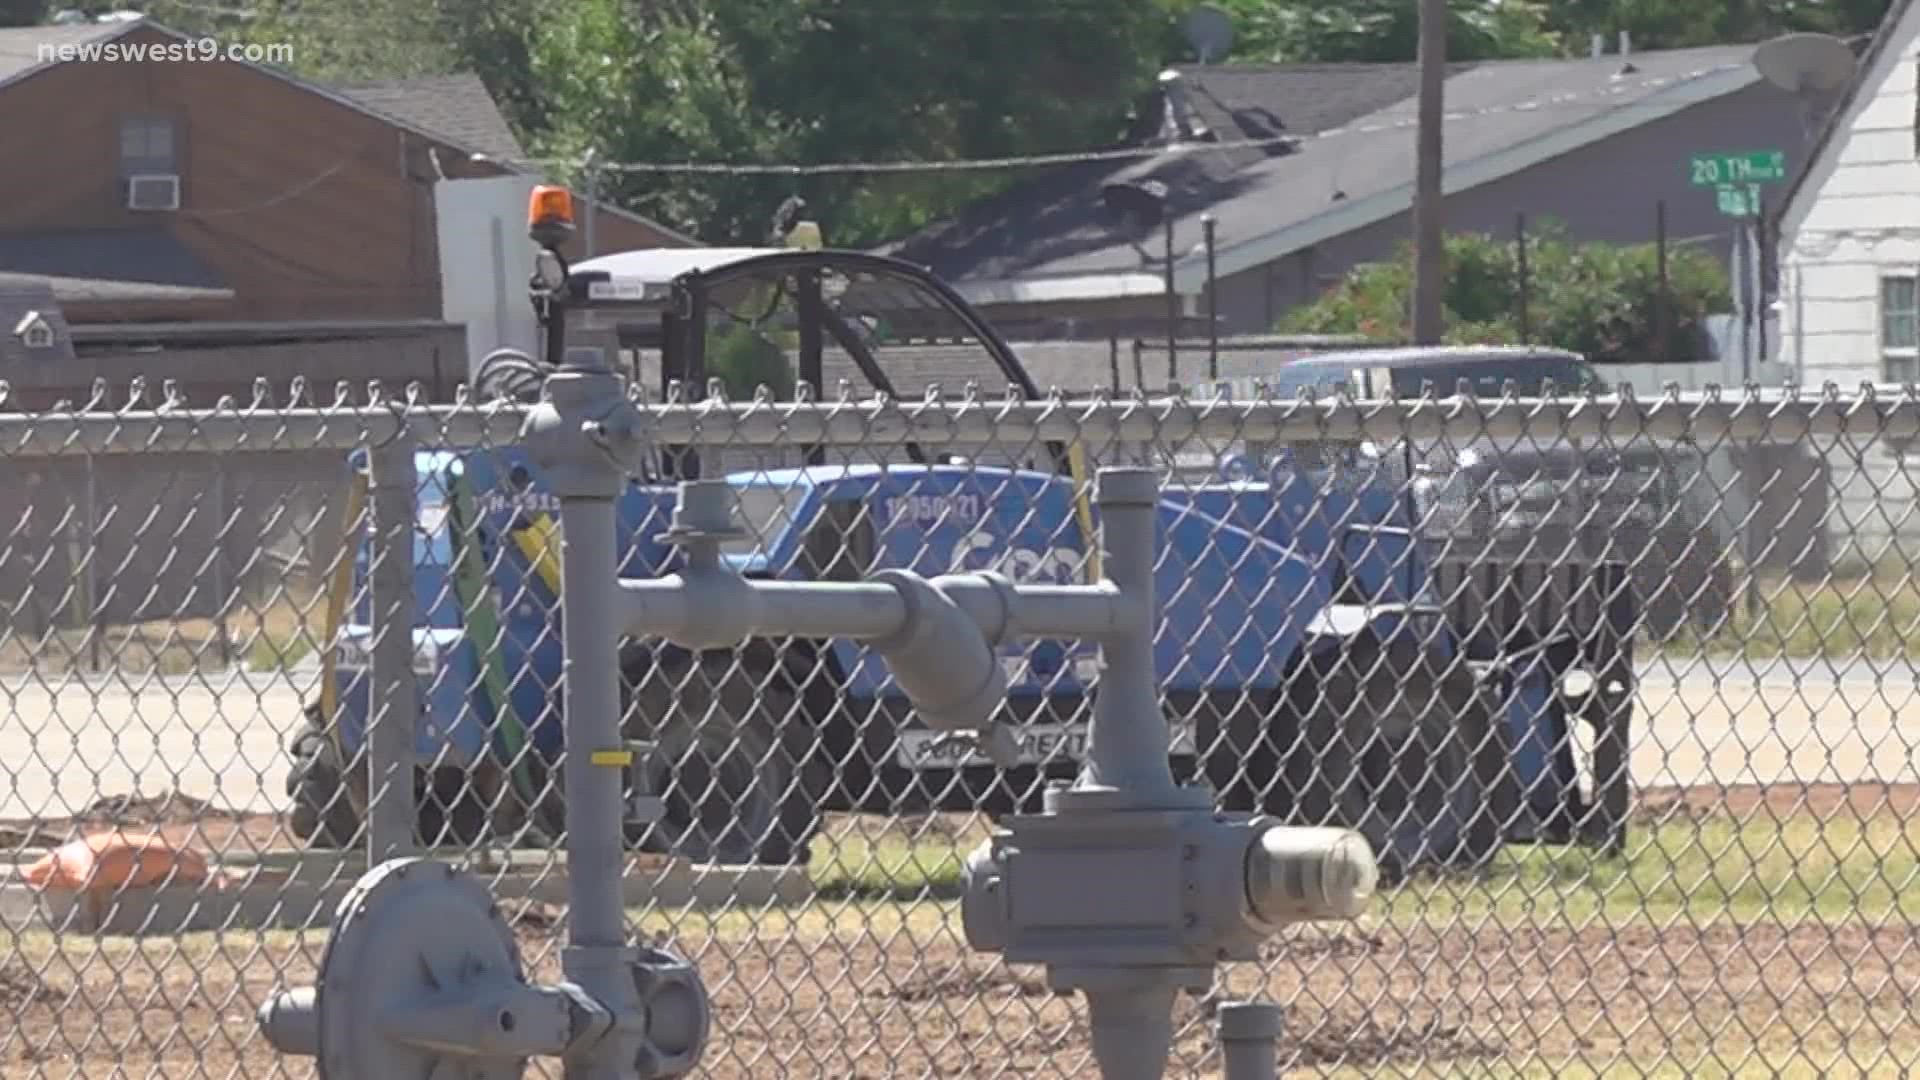 Construction has been underway at Bowie Middle School, and one parent is worried about the safety of some of the students.